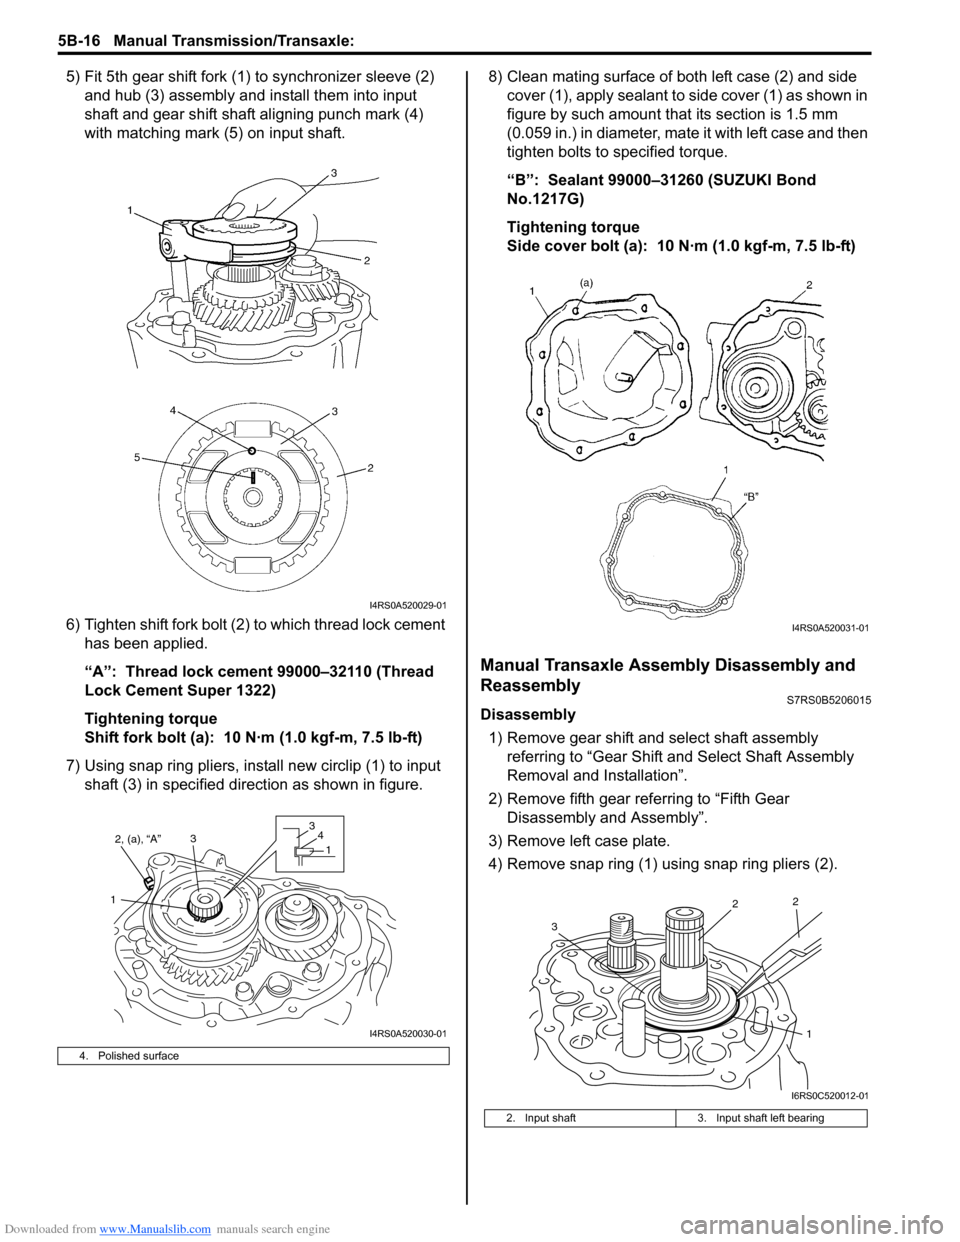 SUZUKI SWIFT 2005 2.G Service Workshop Manual Downloaded from www.Manualslib.com manuals search engine 5B-16 Manual Transmission/Transaxle: 
5) Fit 5th gear shift fork (1) to synchronizer sleeve (2) and hub (3) assembly and install them into inpu